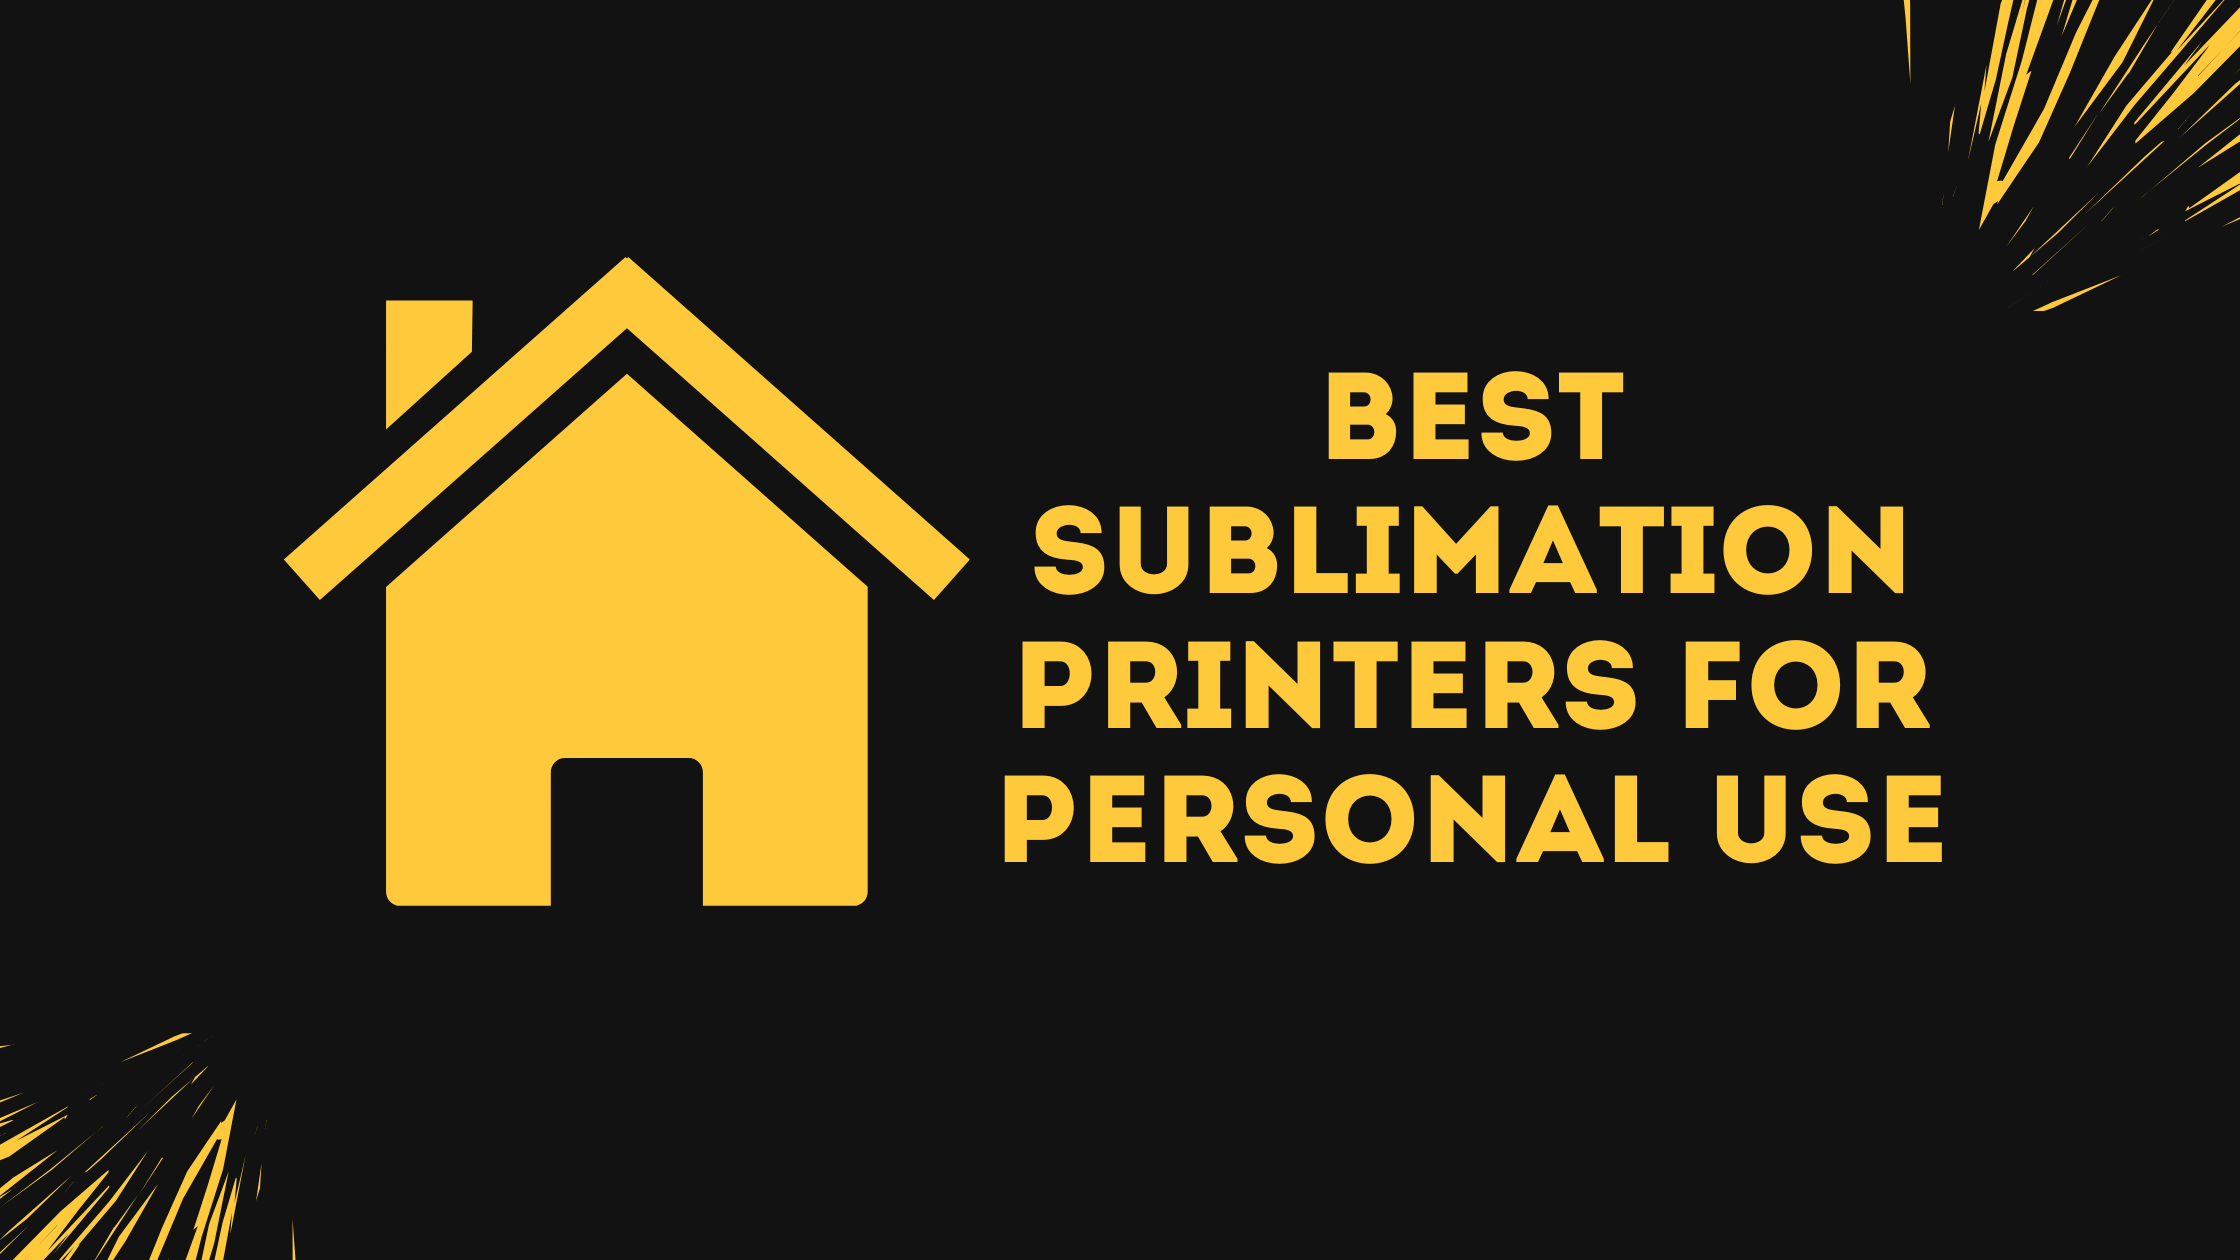 Best Sublimation Printers for Personal Use